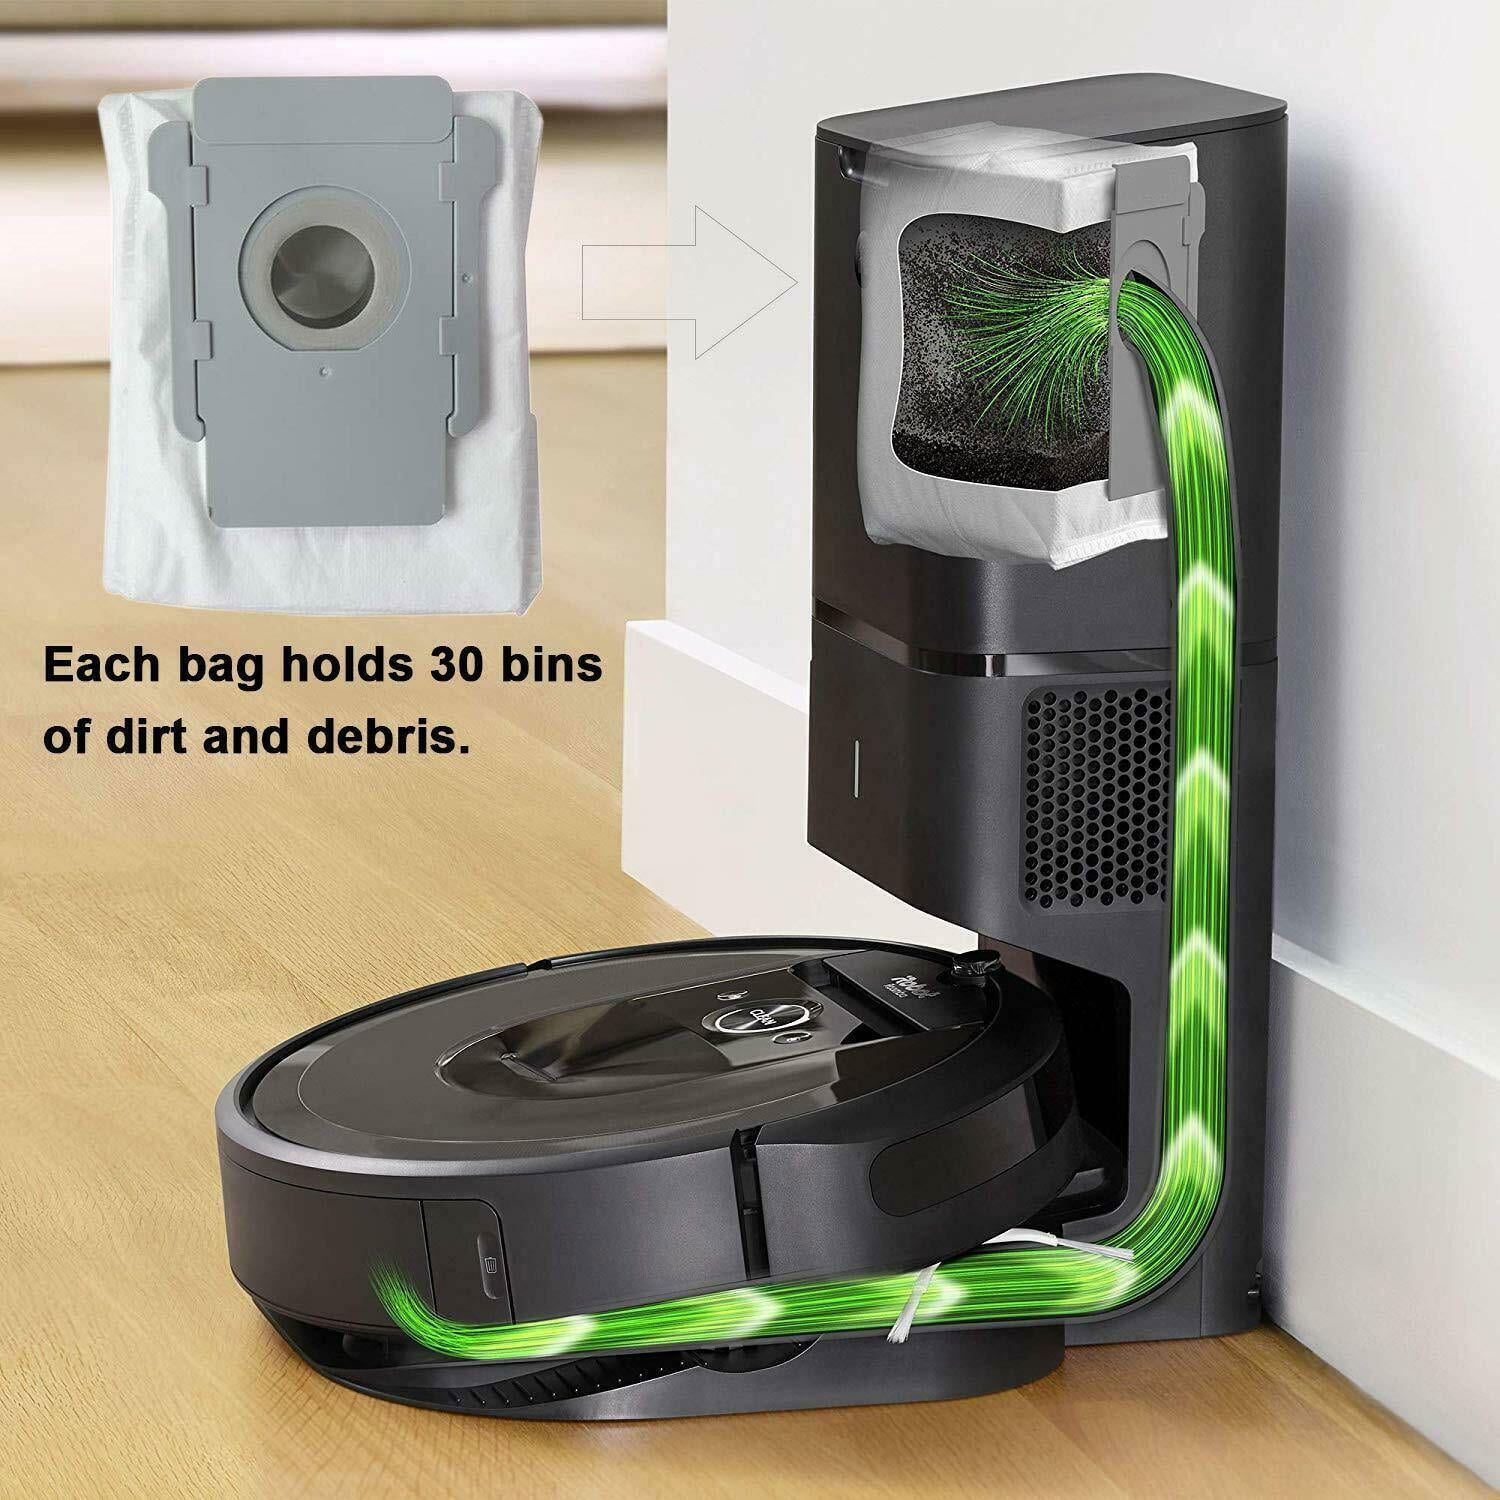 i3 Clean Base i6 iRobot Authentic Parts- Roomba i7 ONLY Dirt Disposal TESTED 